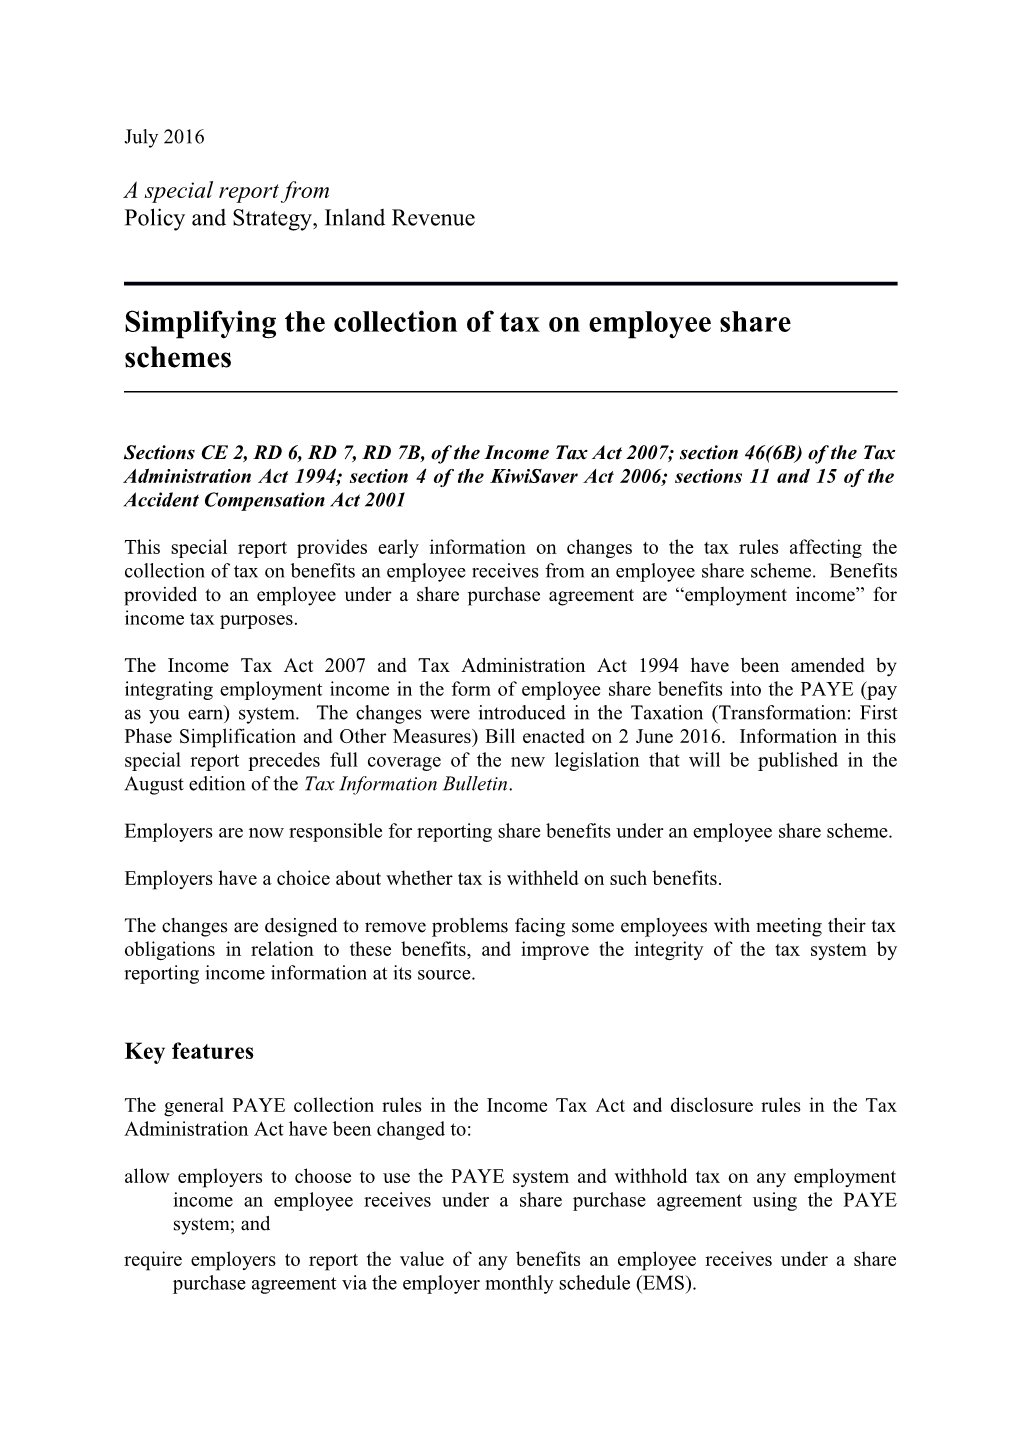 Simplifying the Collection of Tax on Employee Share Schemes (Special Report) (July 2016)